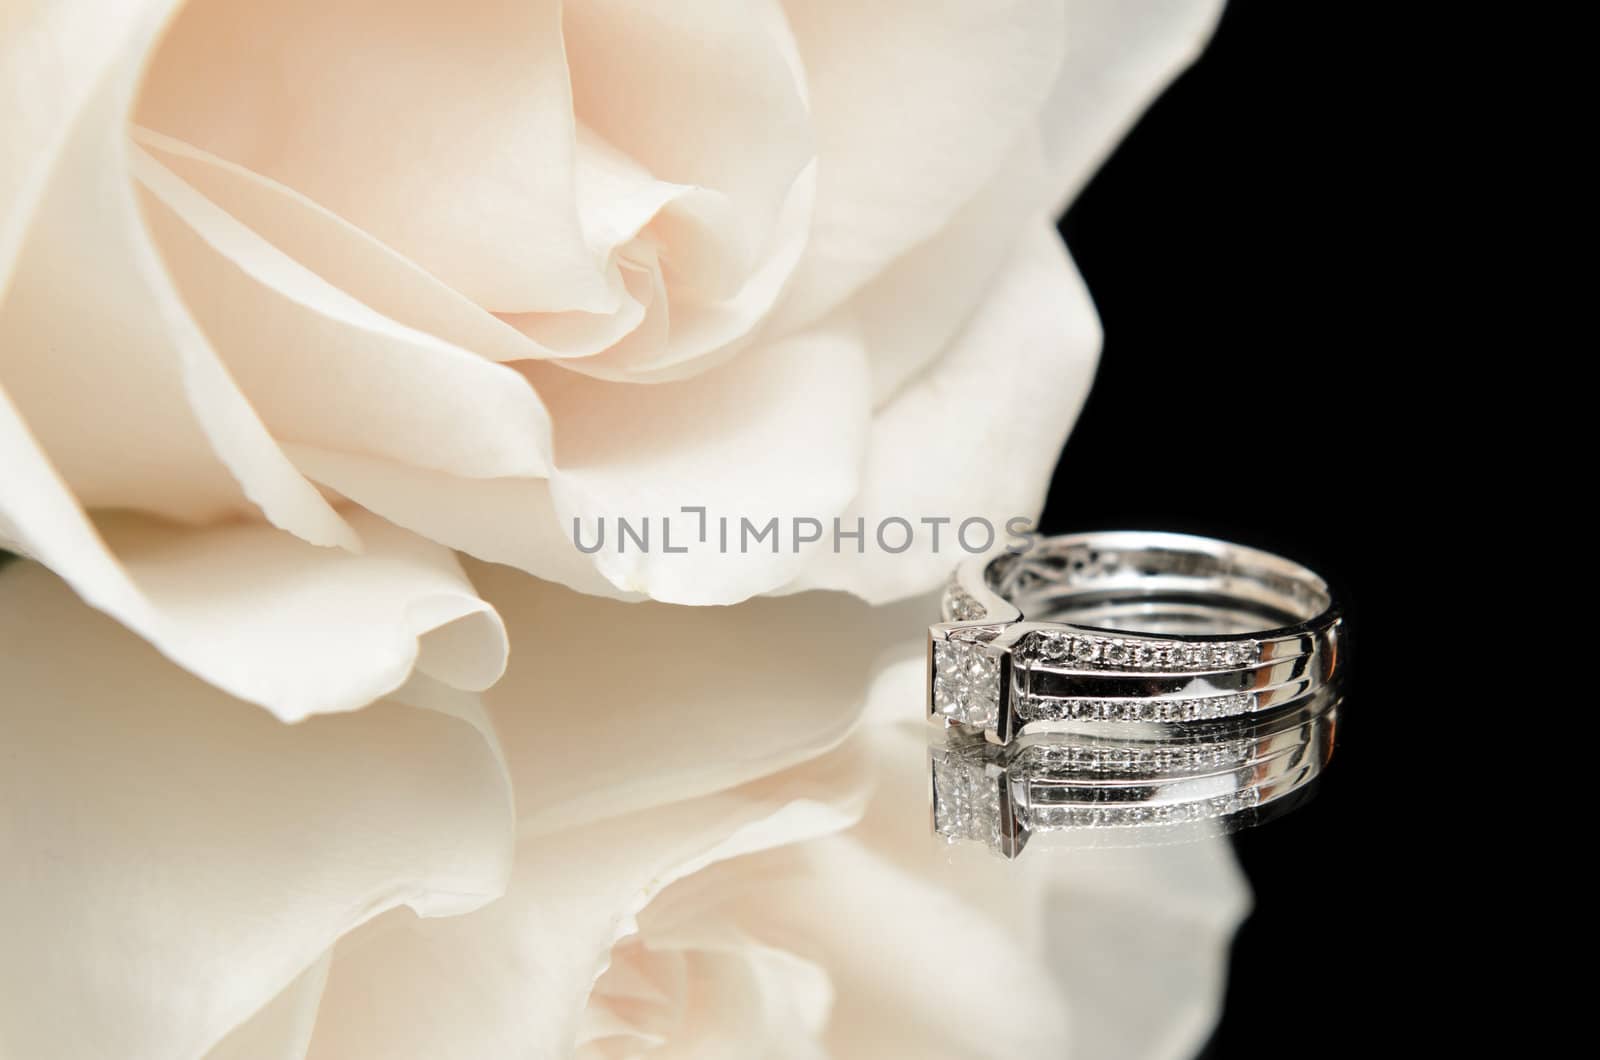 A diamond engagement ring with a white rose, shot with a reflection on a black background.